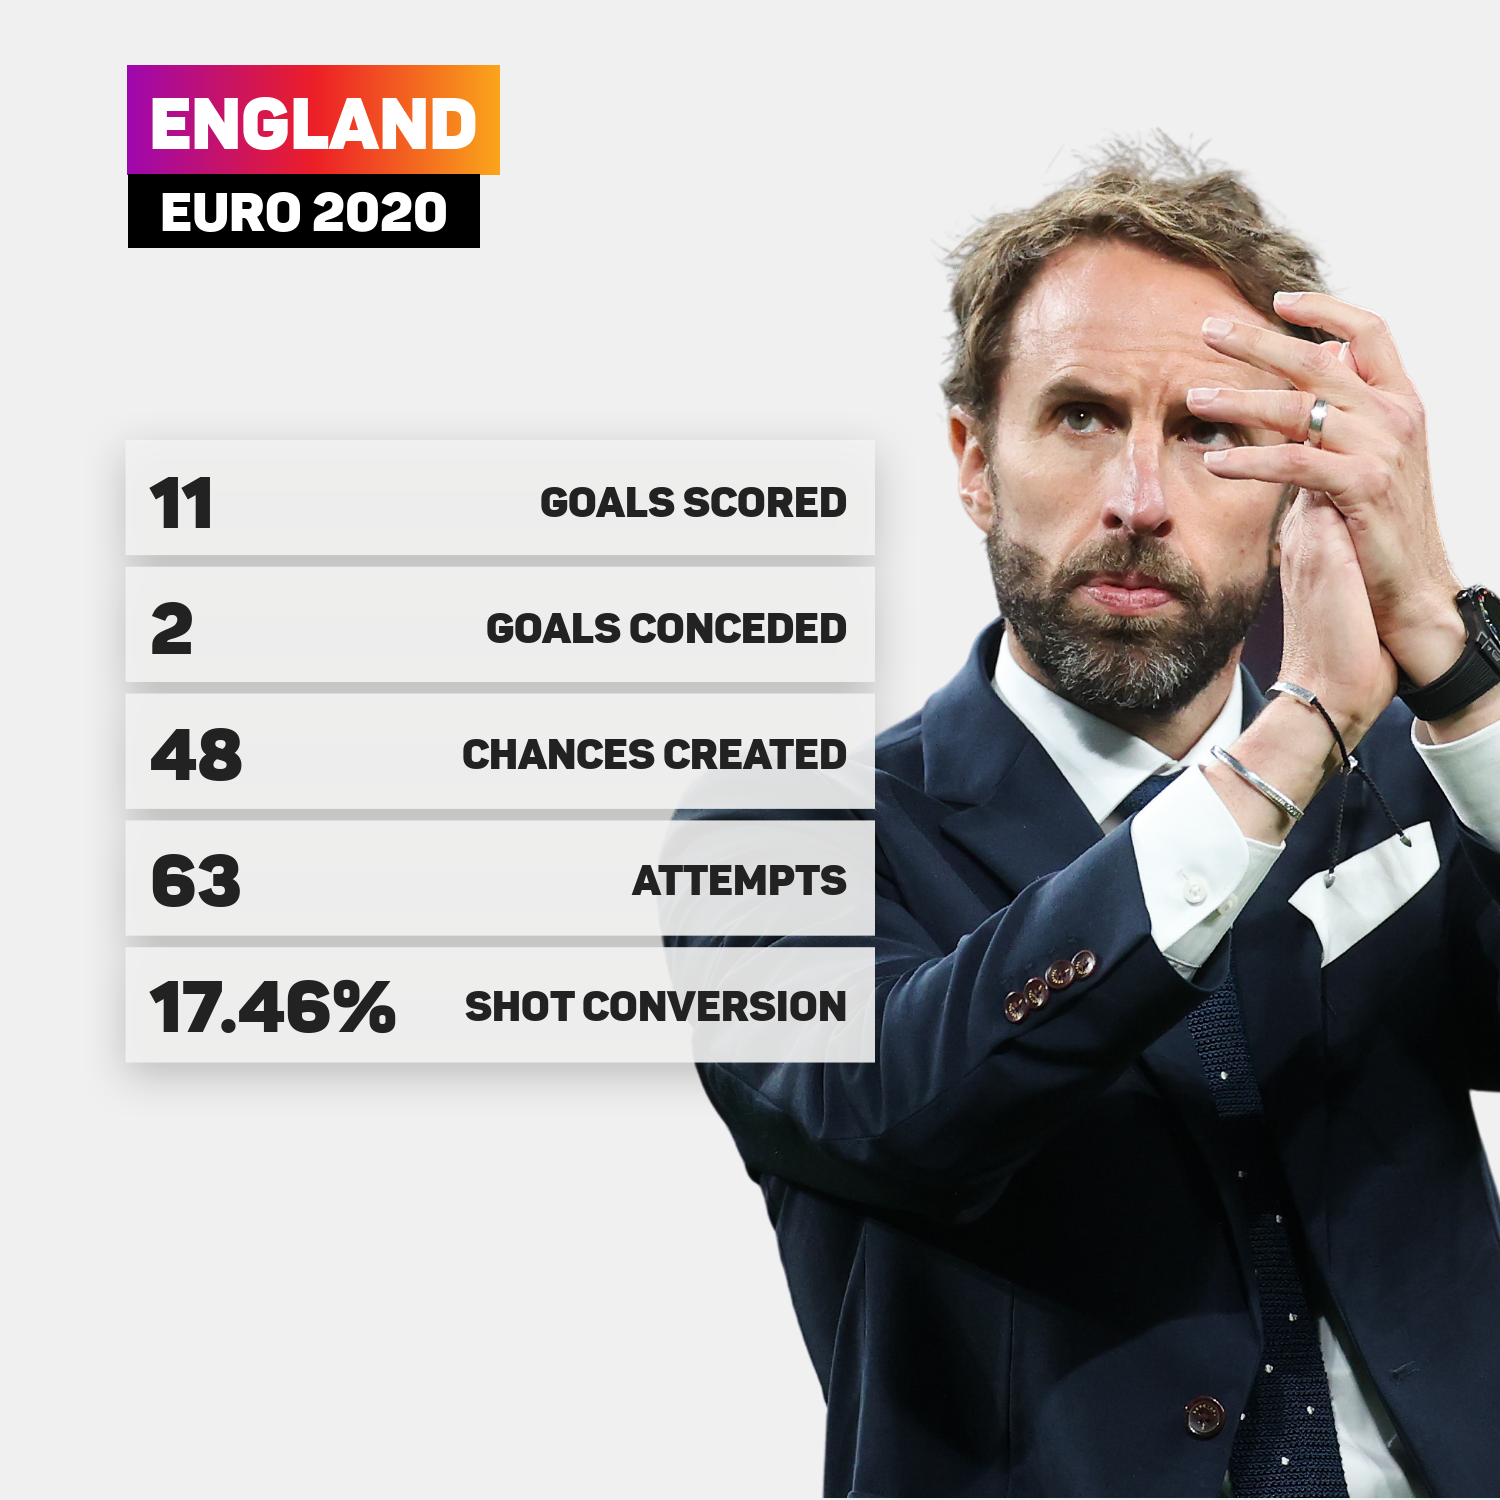 England's key numbers from Euro 2020